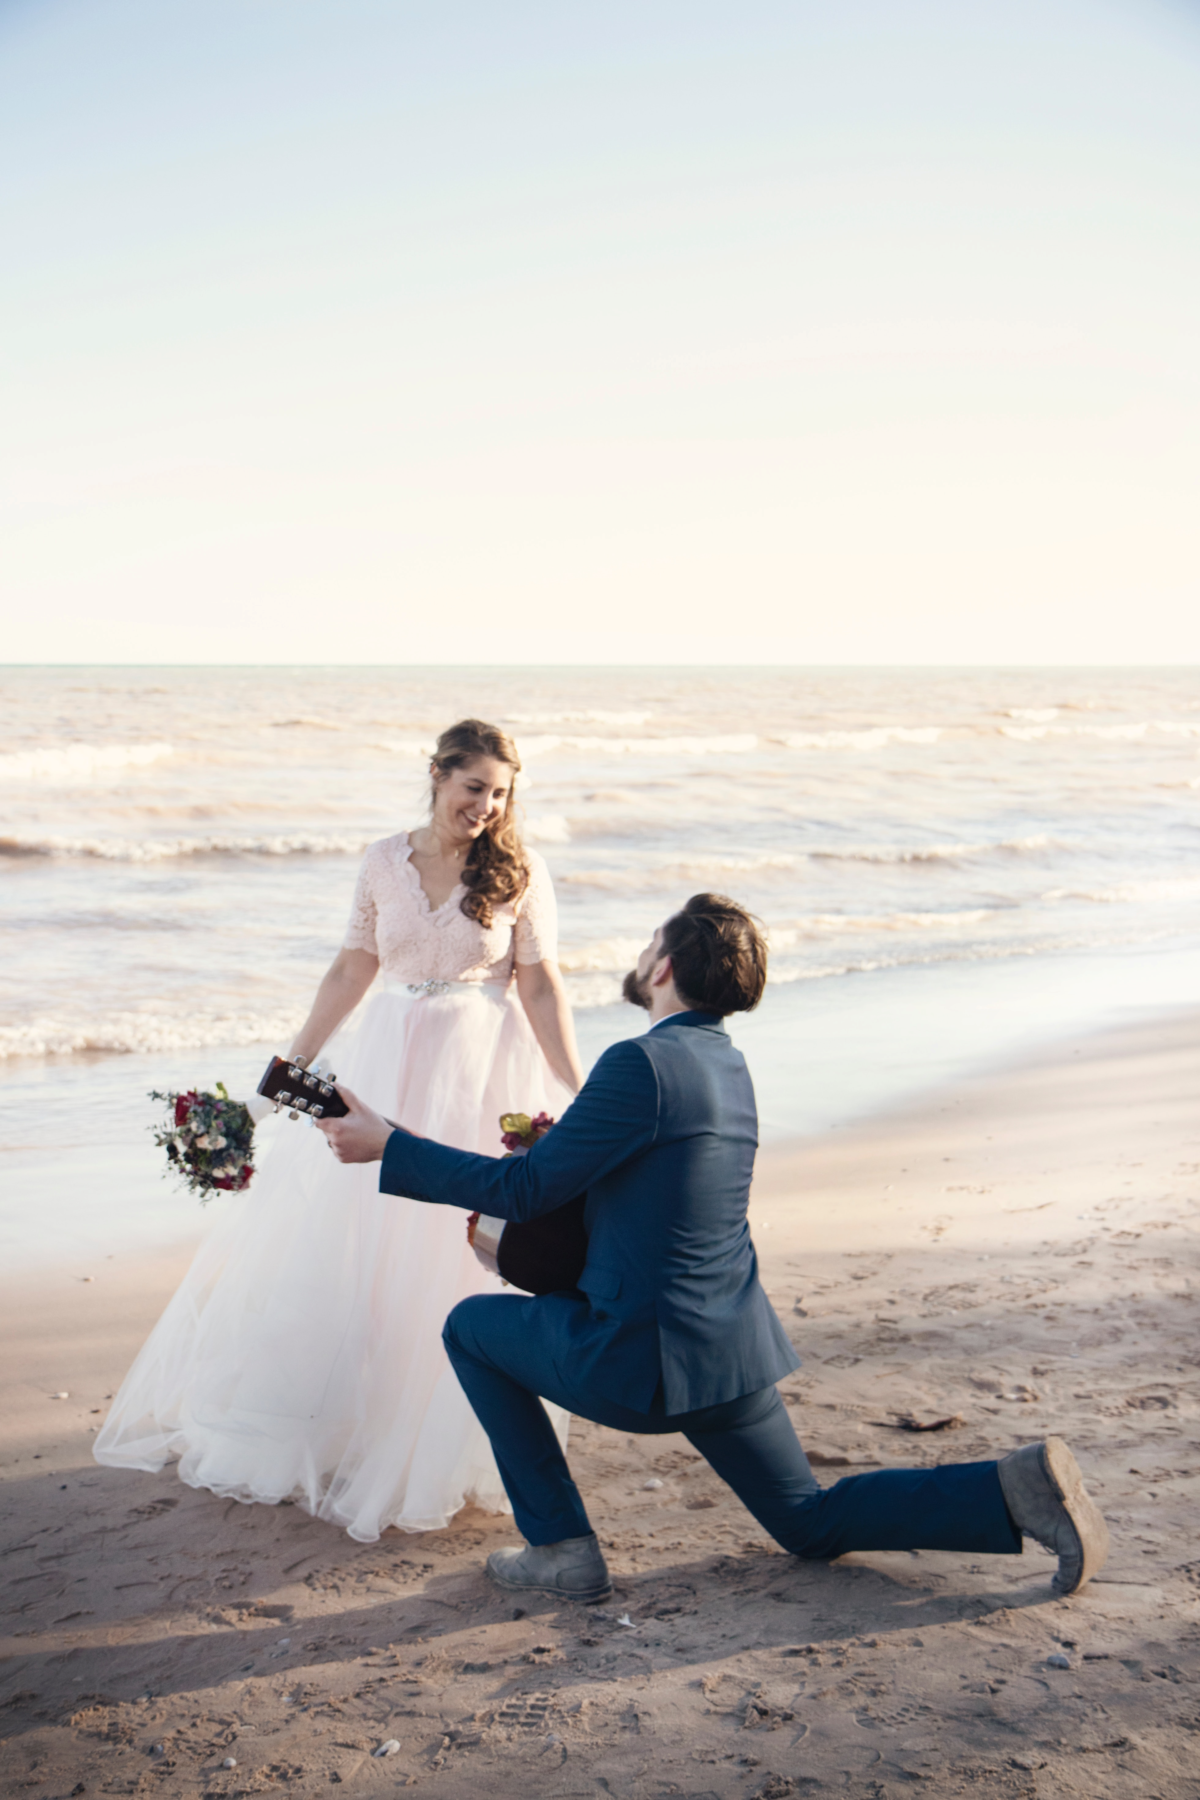 7 Elevated Trip Ideas for Your Beach Bride